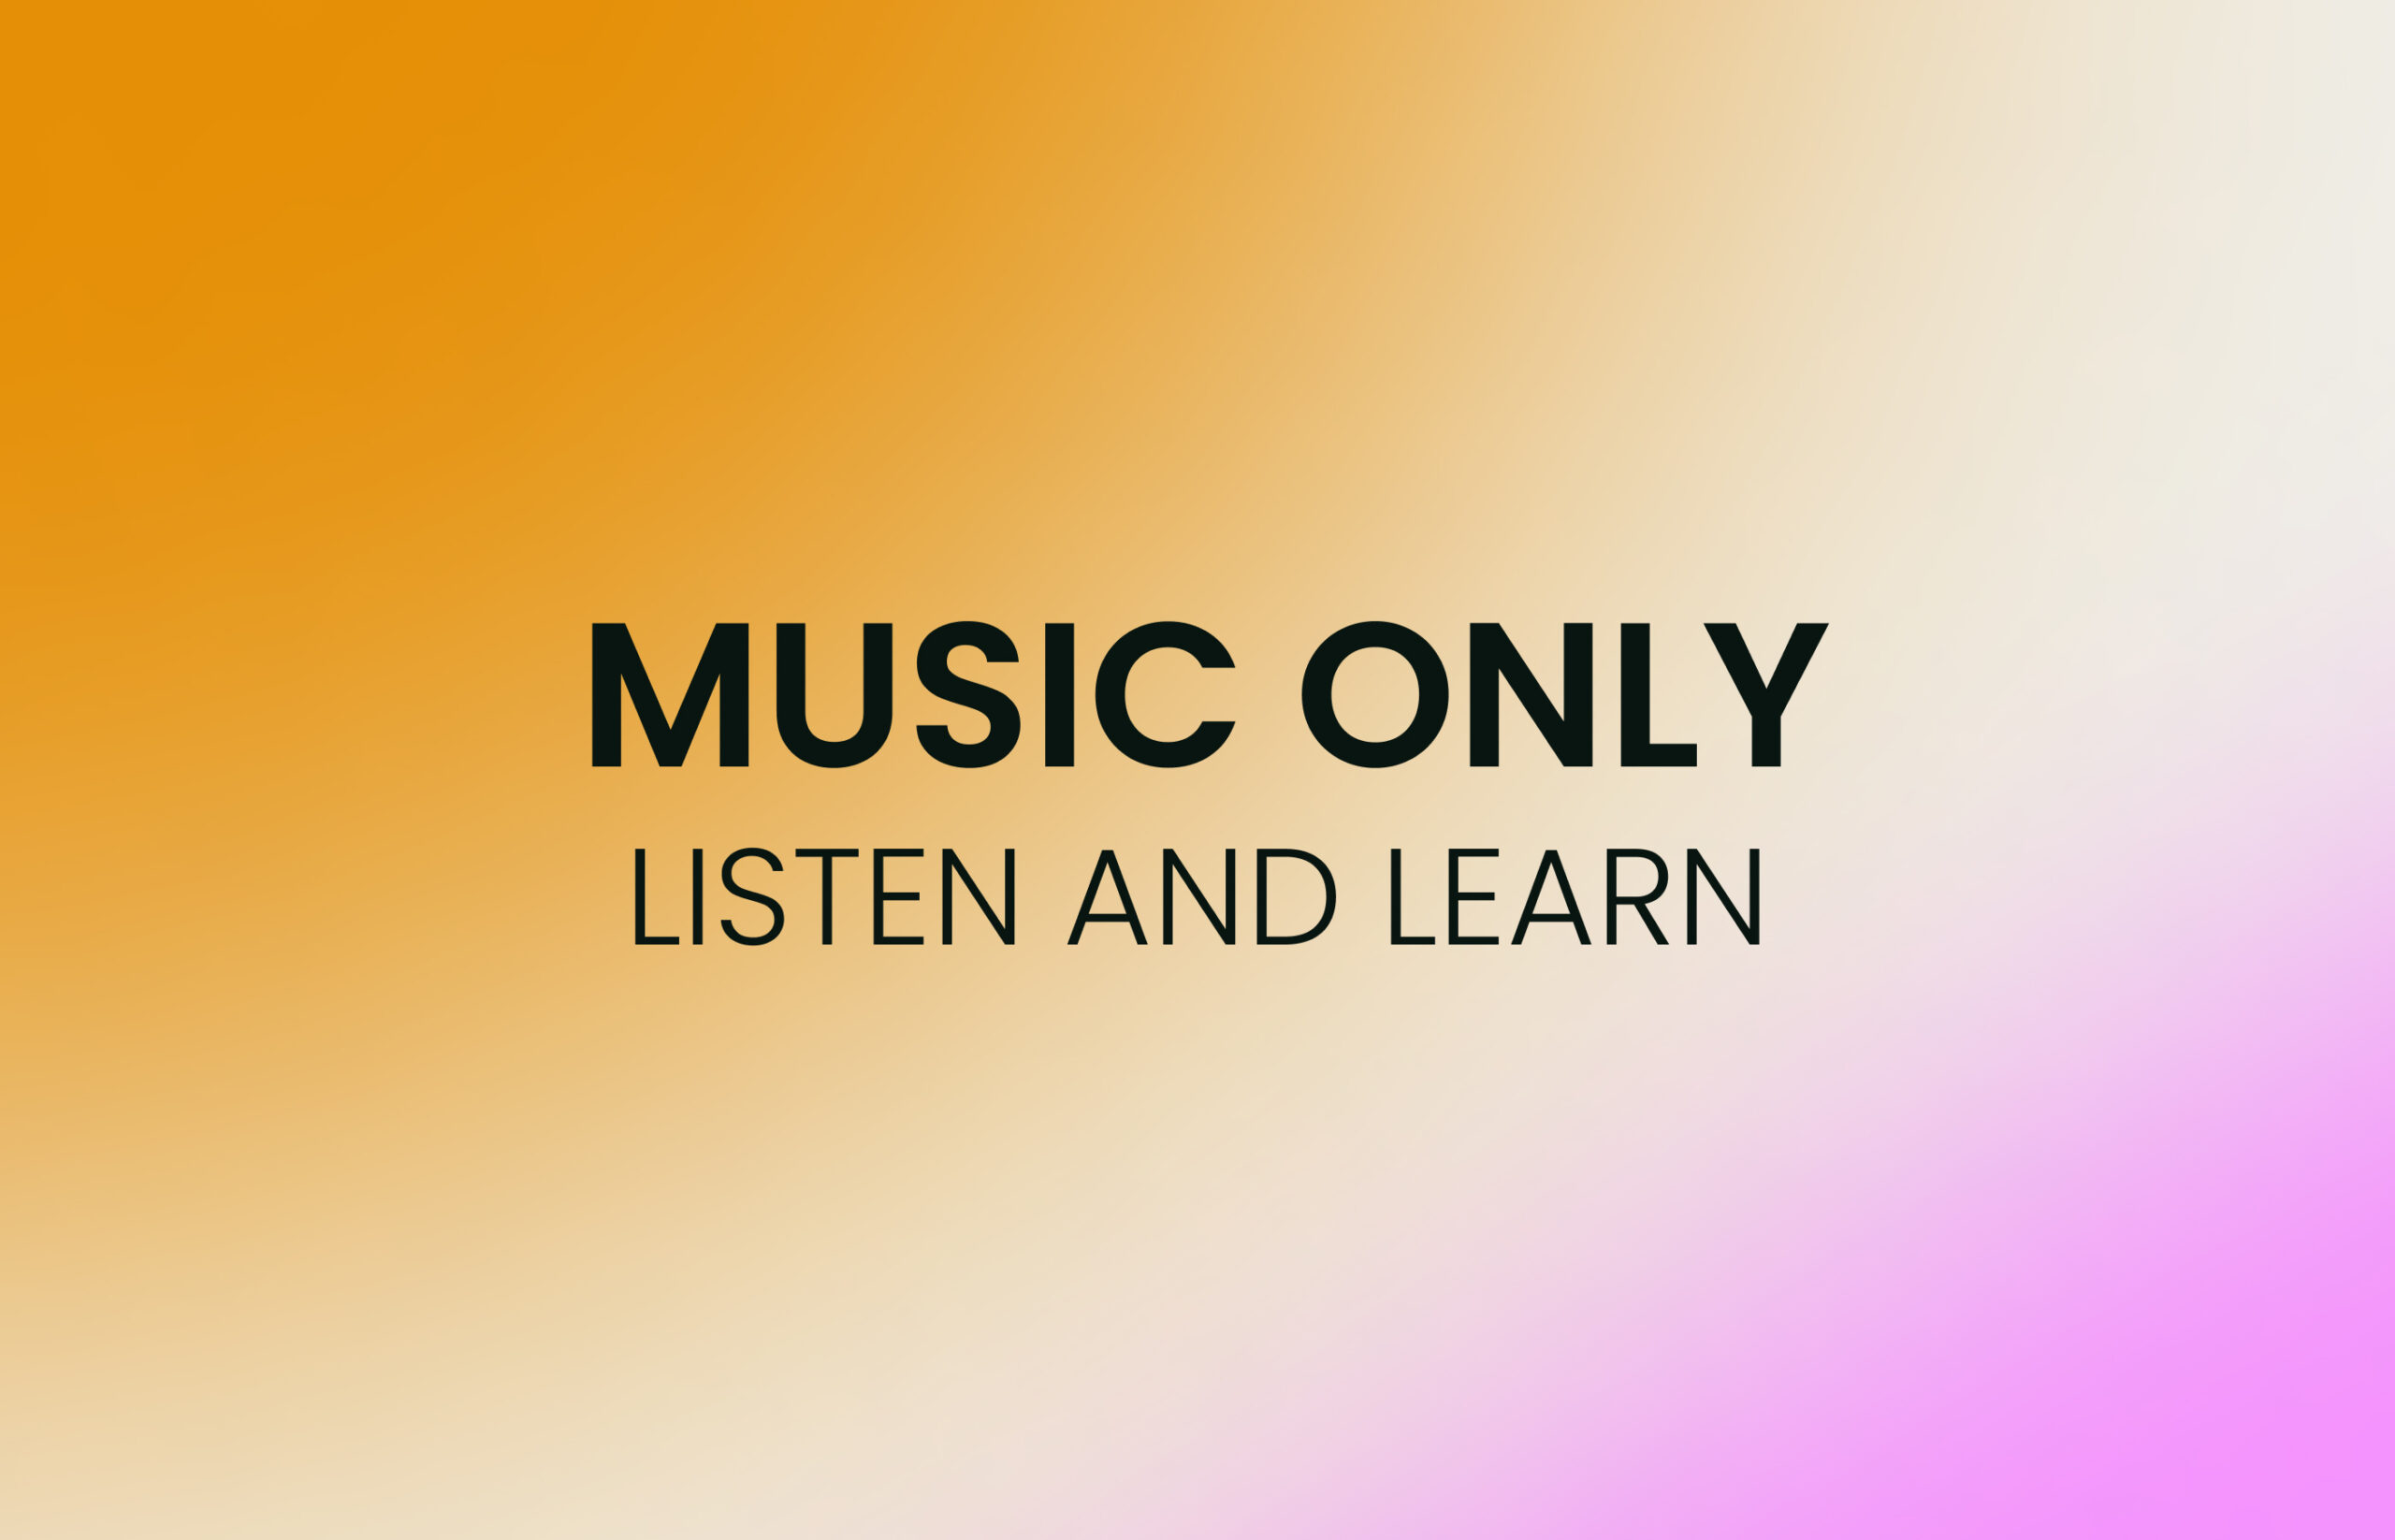 Music only listen and learn